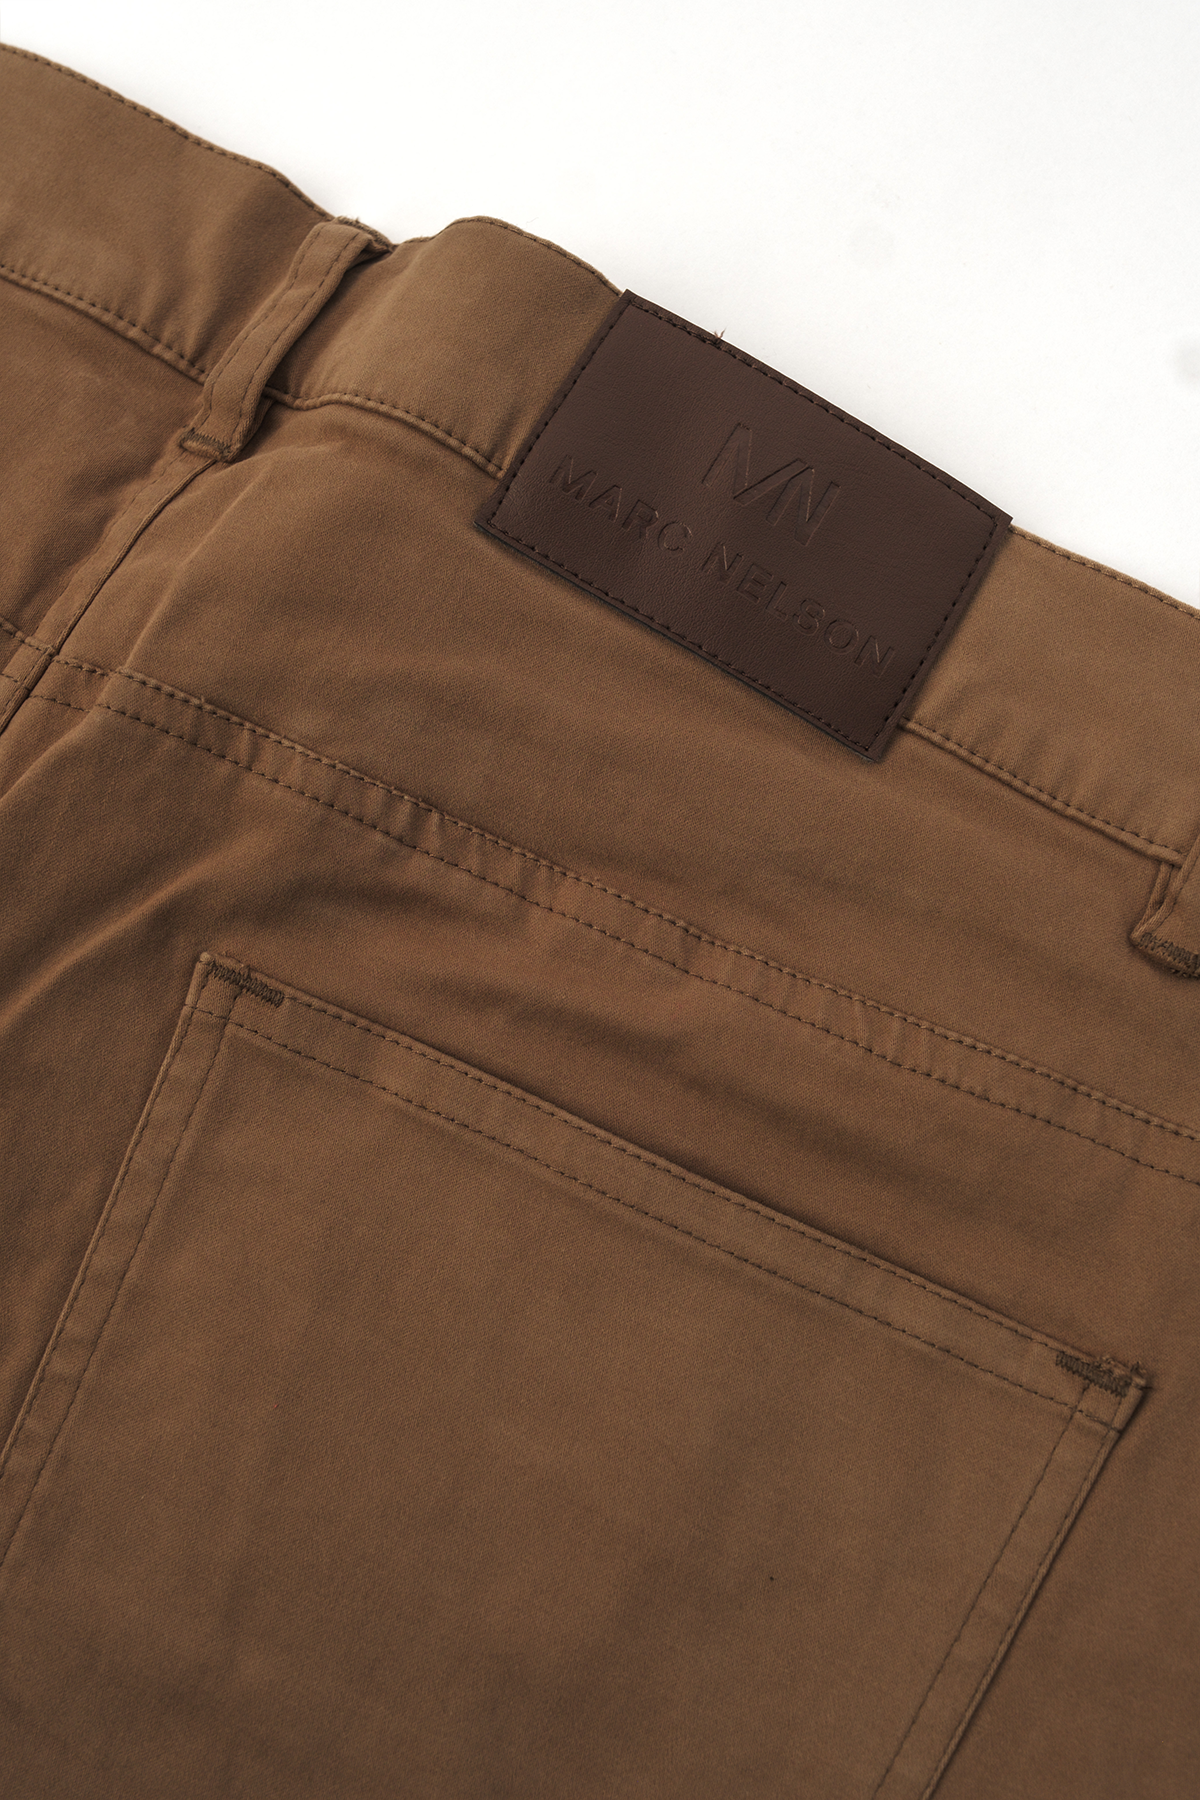 Close up photos showing the details on the backside of our george buck pants. 